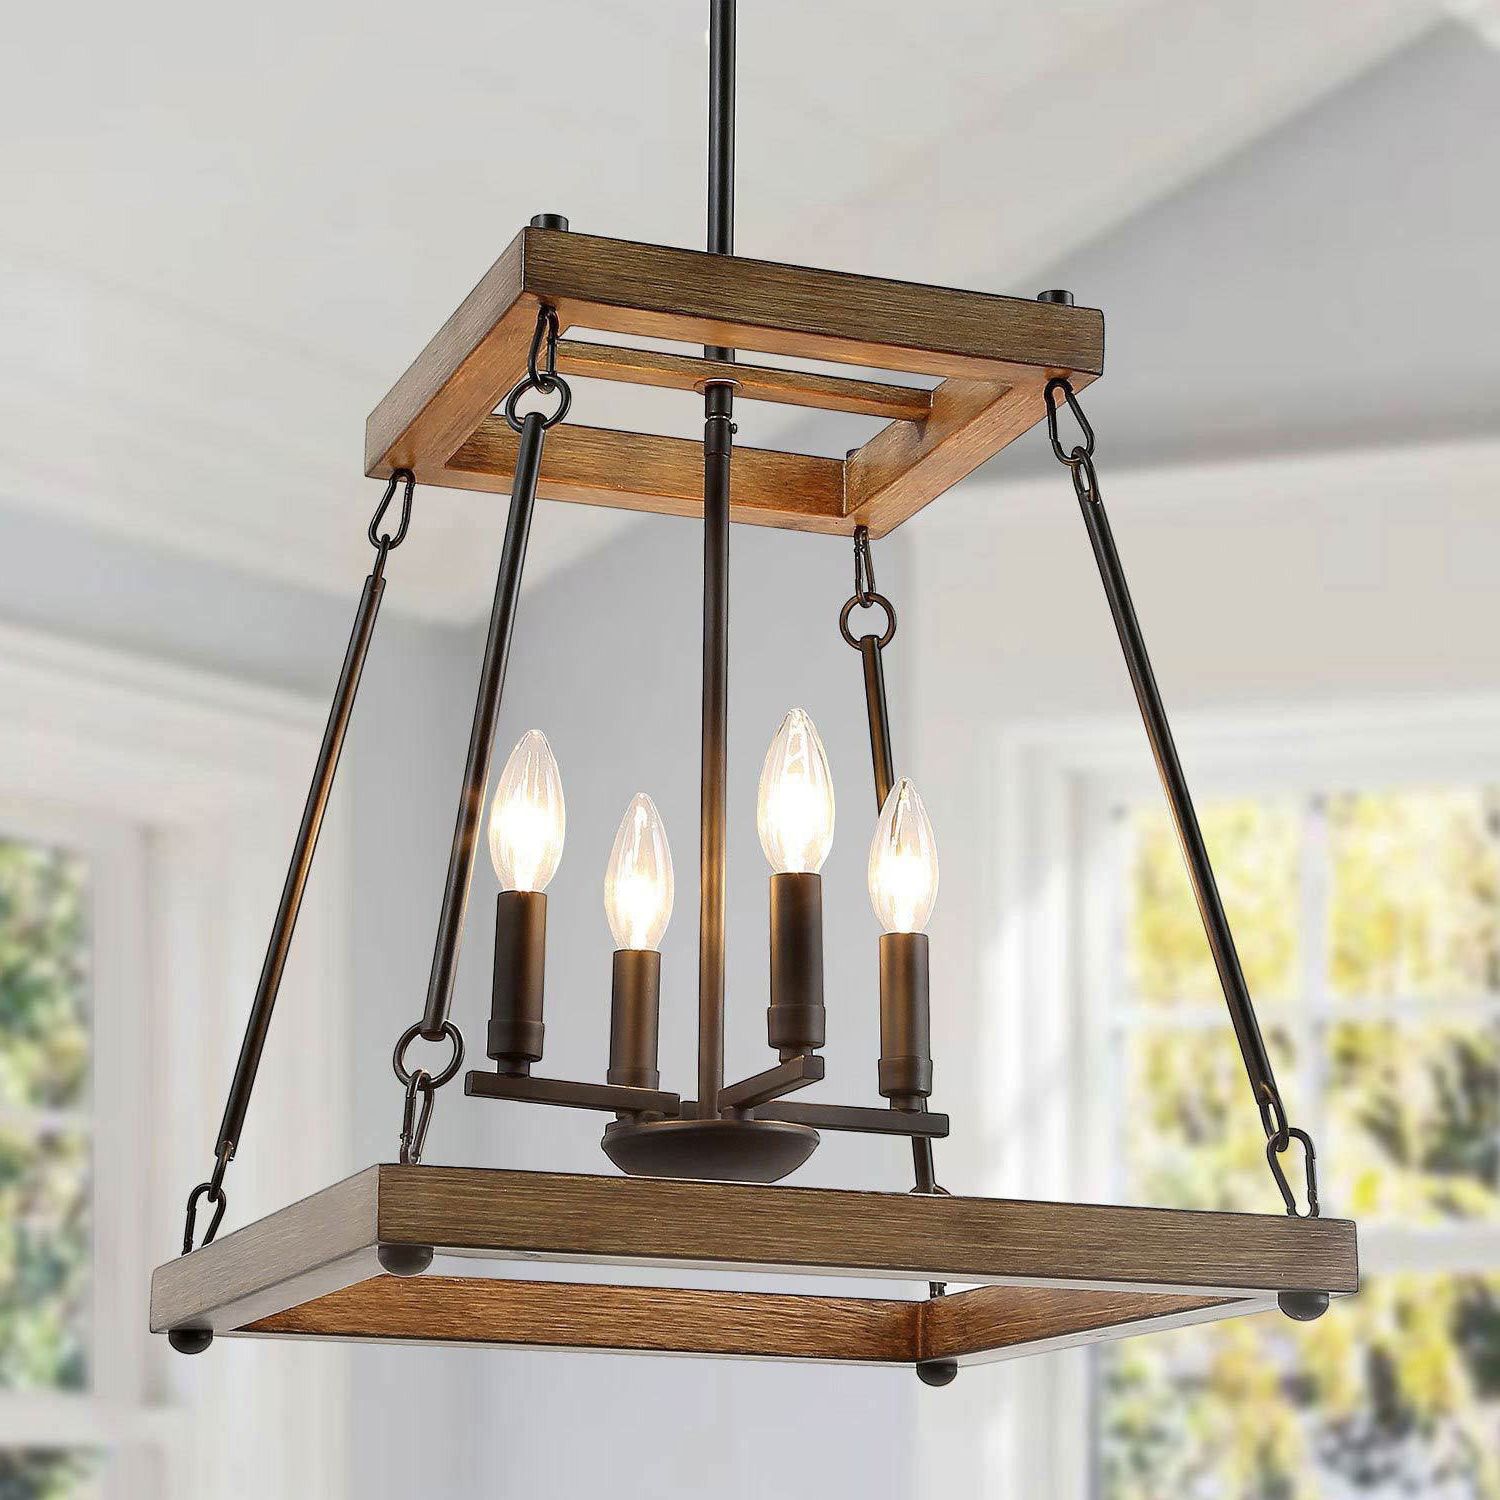 Well Liked Lnc 4 Light Farmhouse Lantern Chandelier For Kitchen Island/dining Room –  Walmart Throughout Creme Parchment Glass Lantern Chandeliers (View 5 of 15)